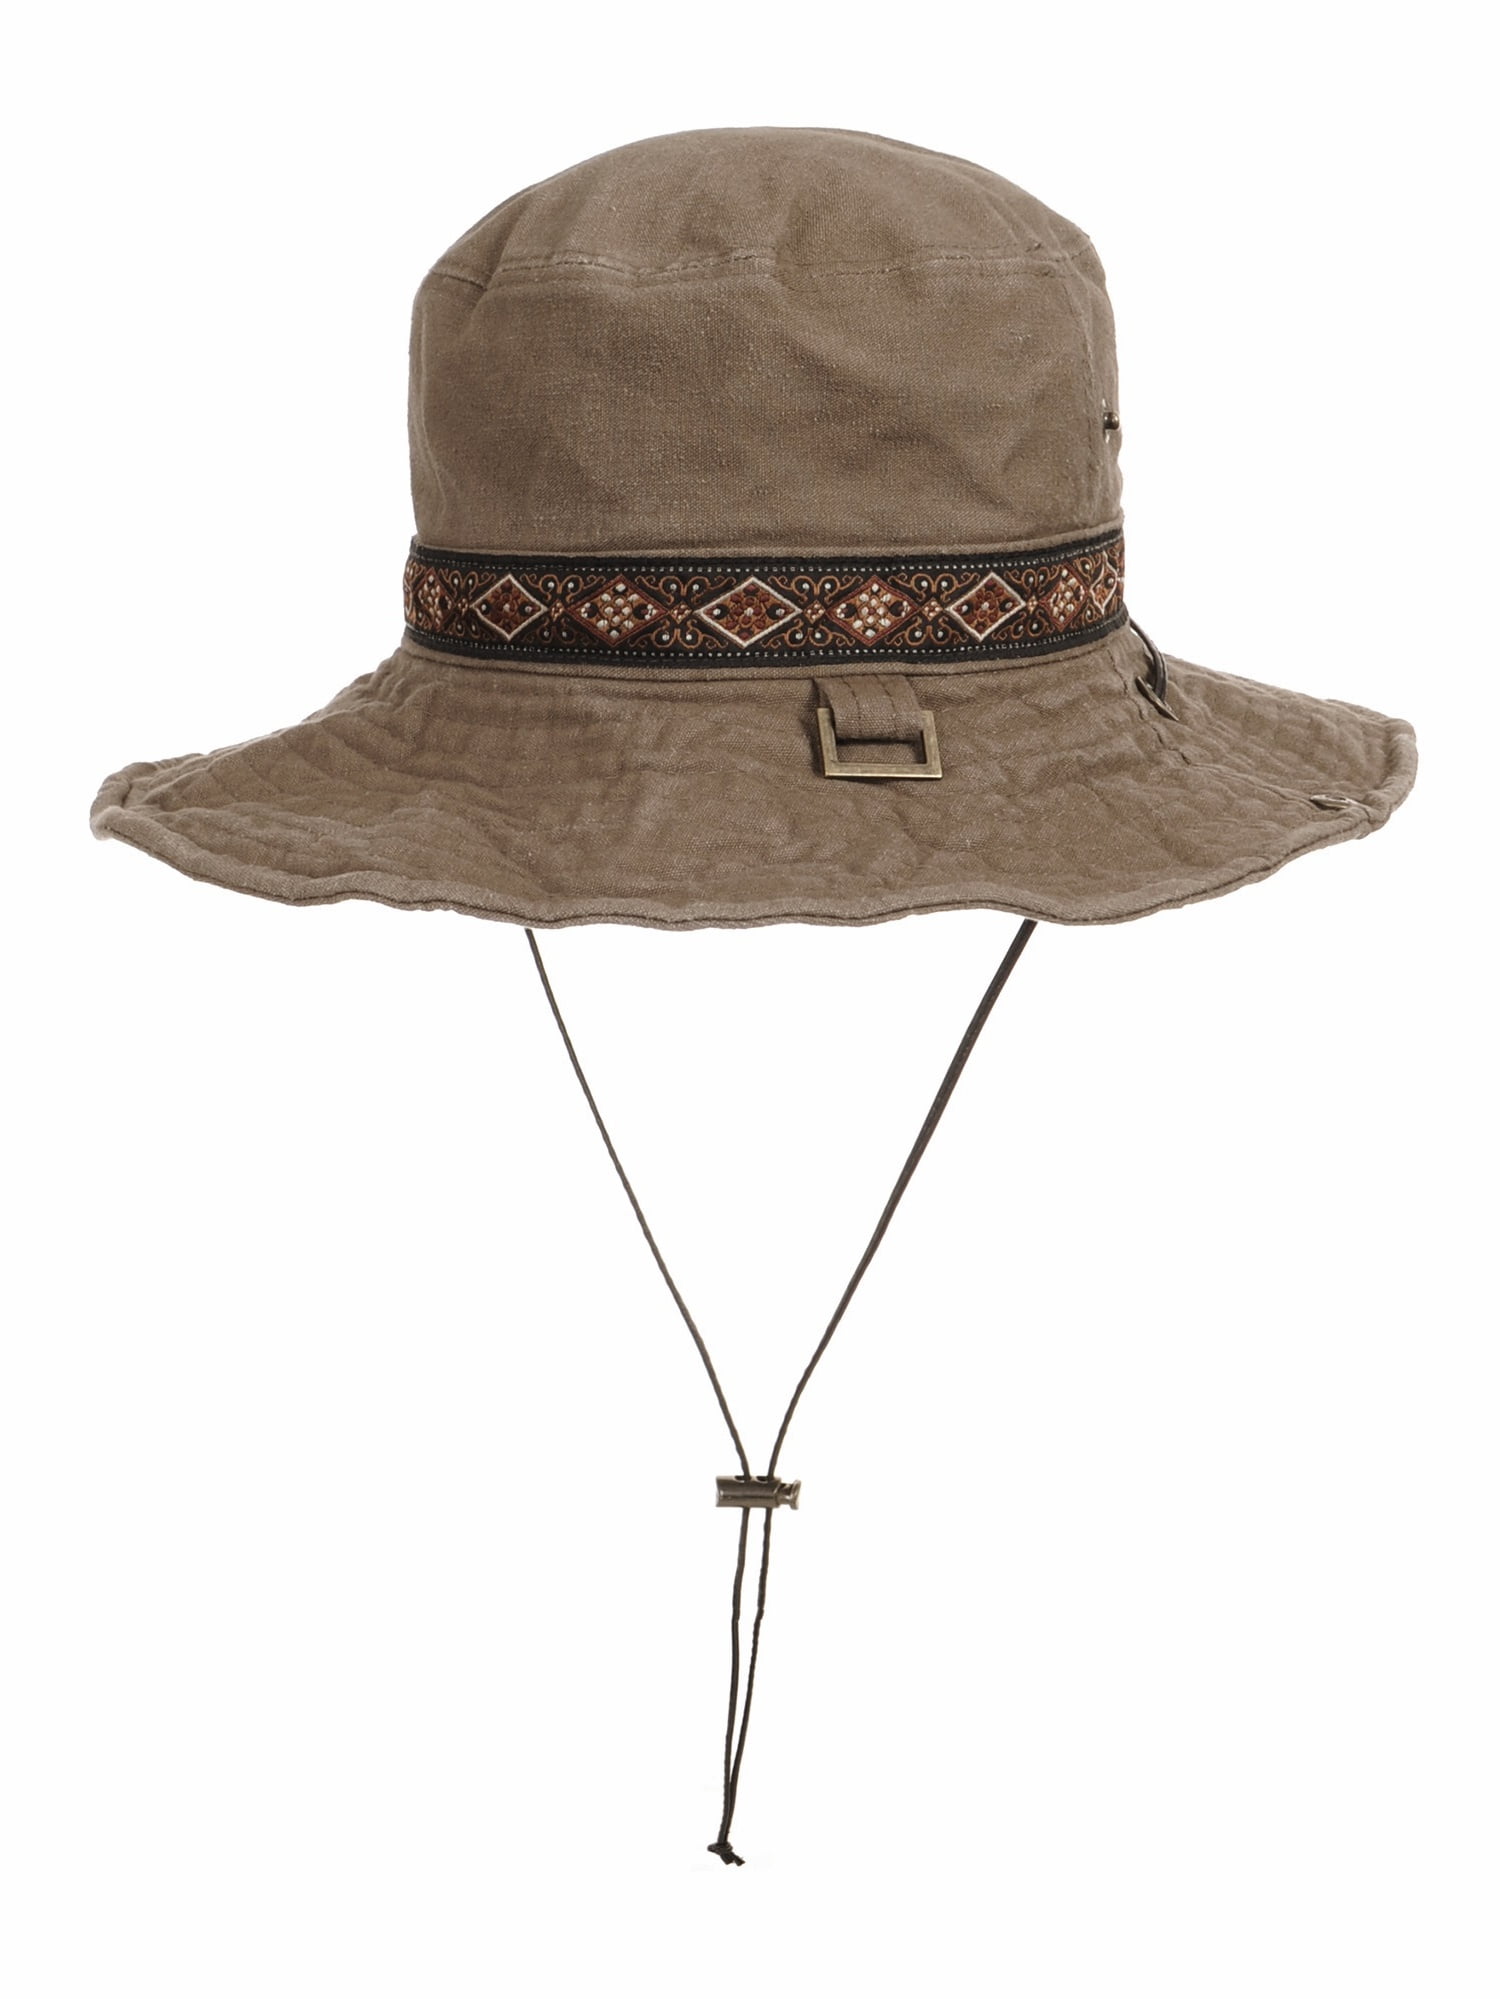 WITHMOONS Boonie Bush Hat Aztec Pattern Wide Brim Side Snap 